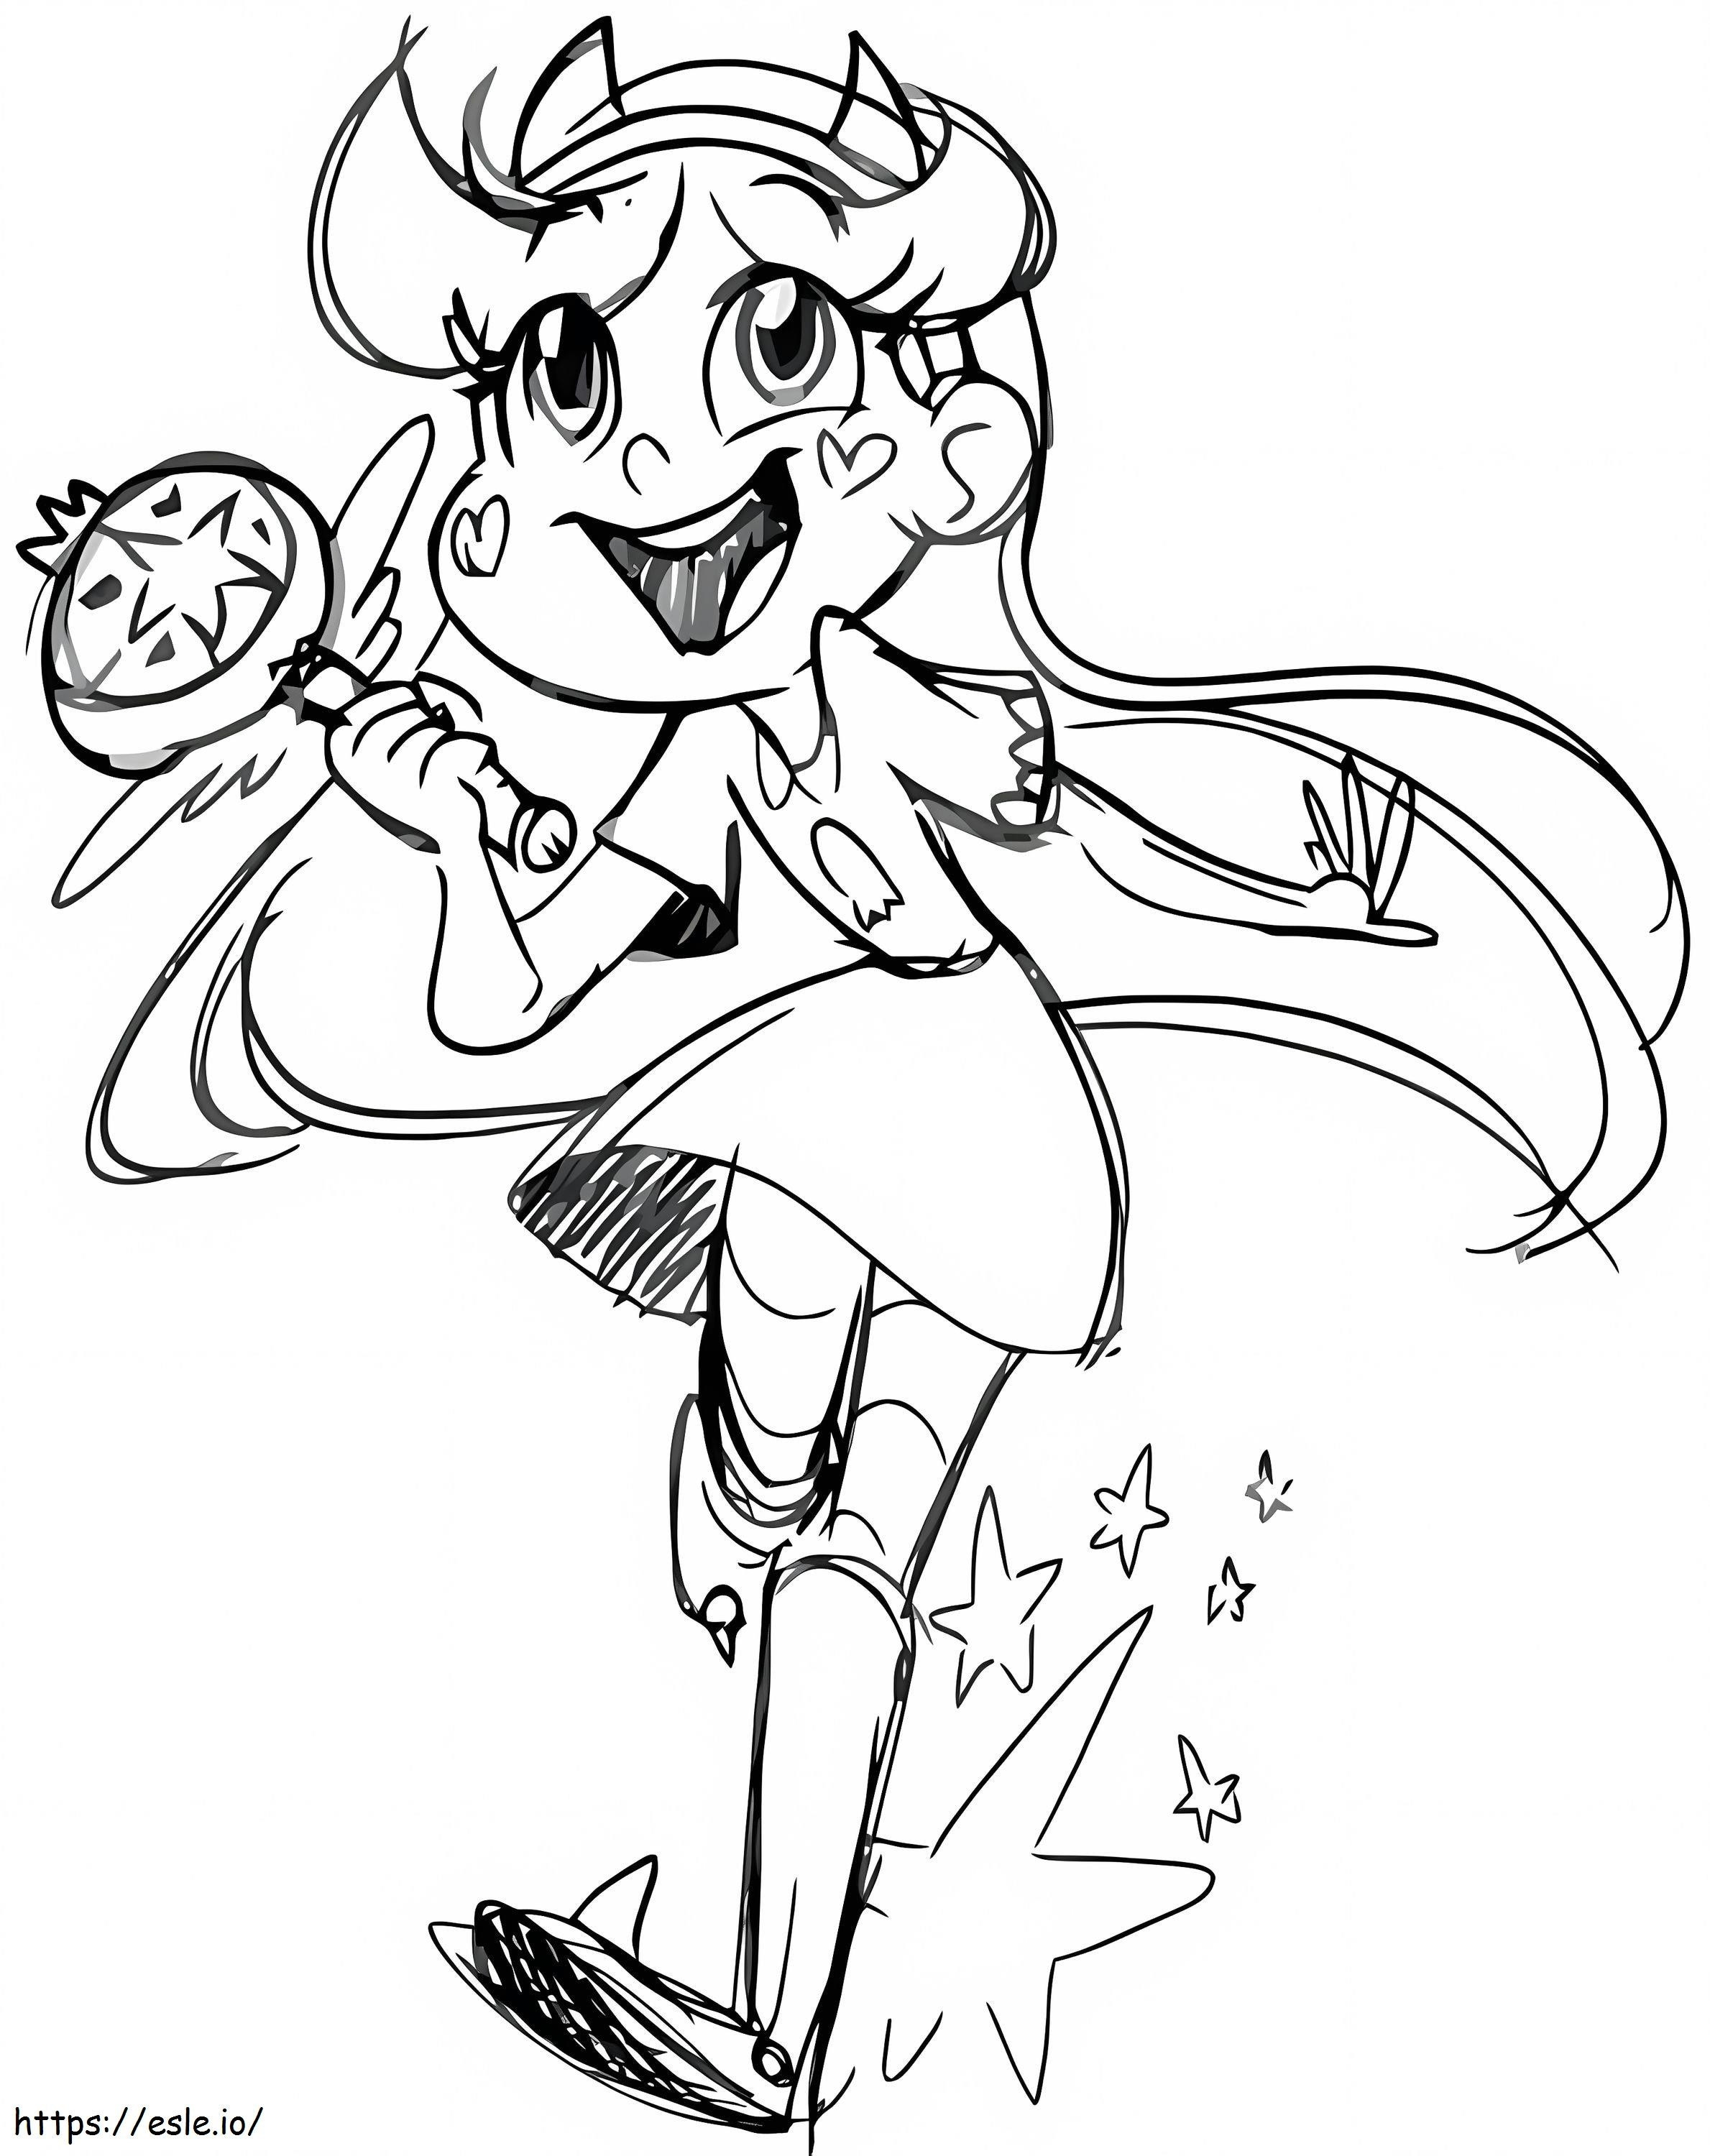 Adorable Star Butterfly coloring page